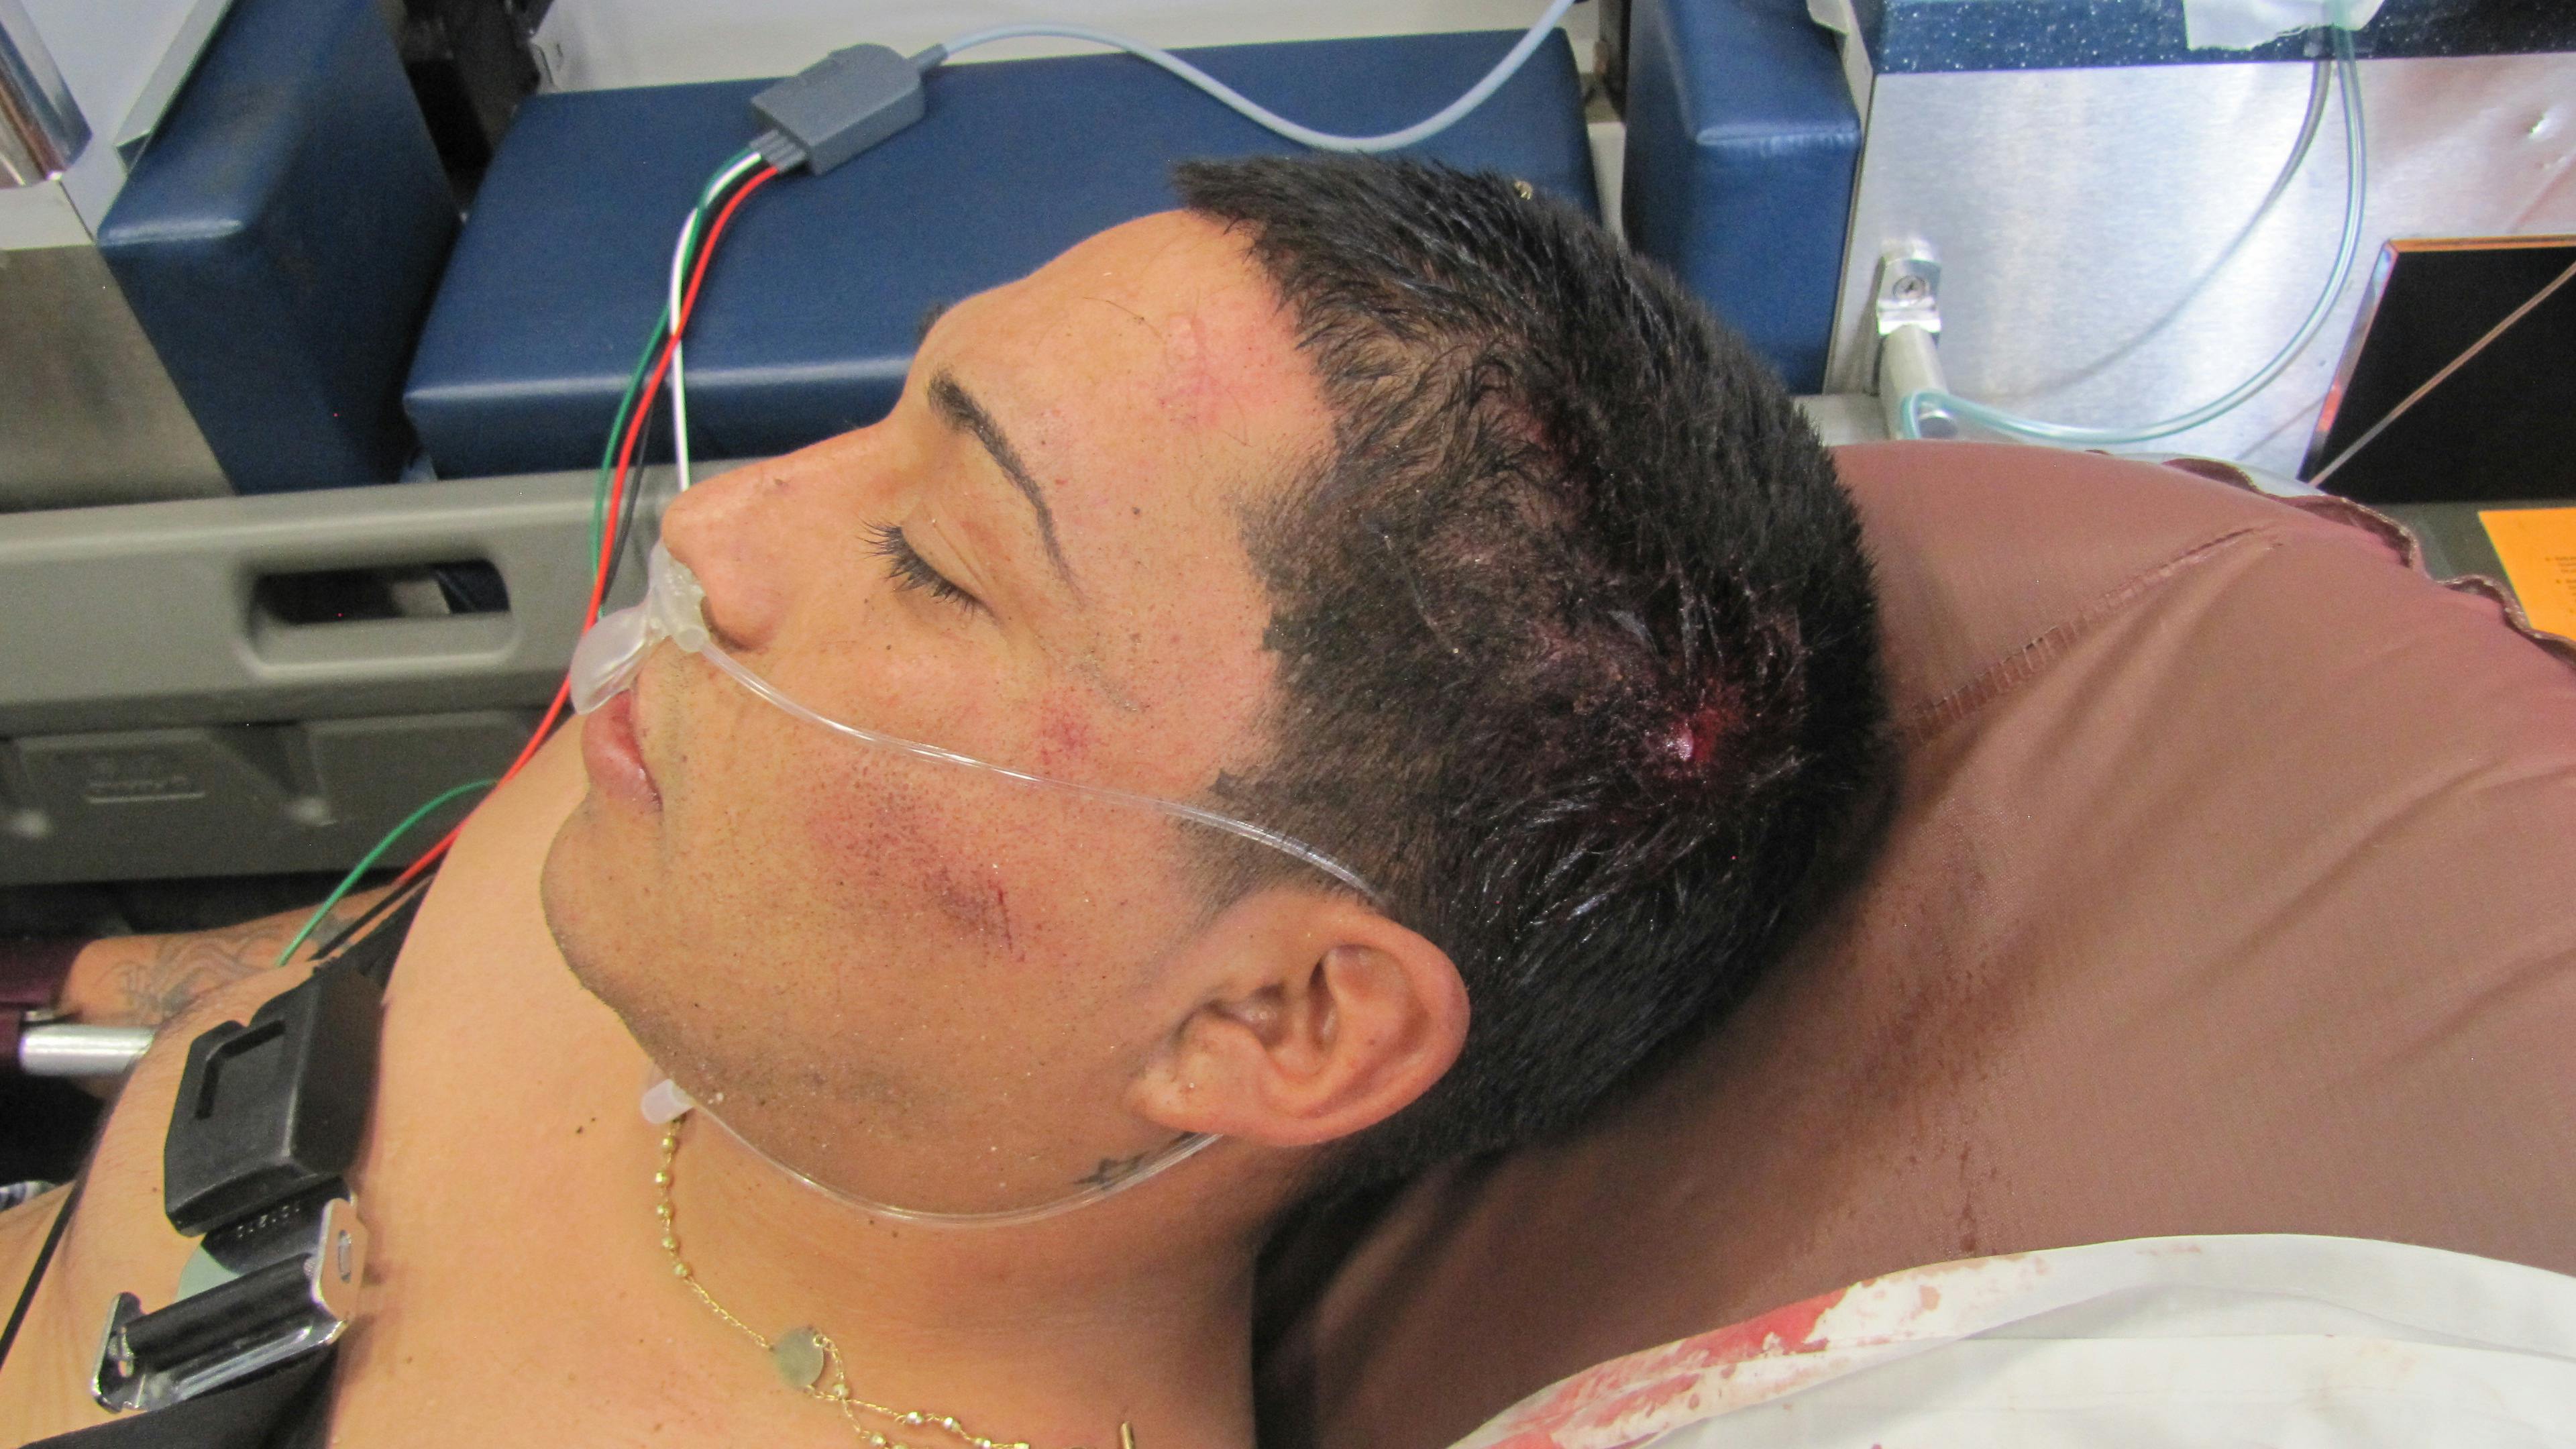 Cuts and bruises shown on David Flores' head after his Aug 14. arrest